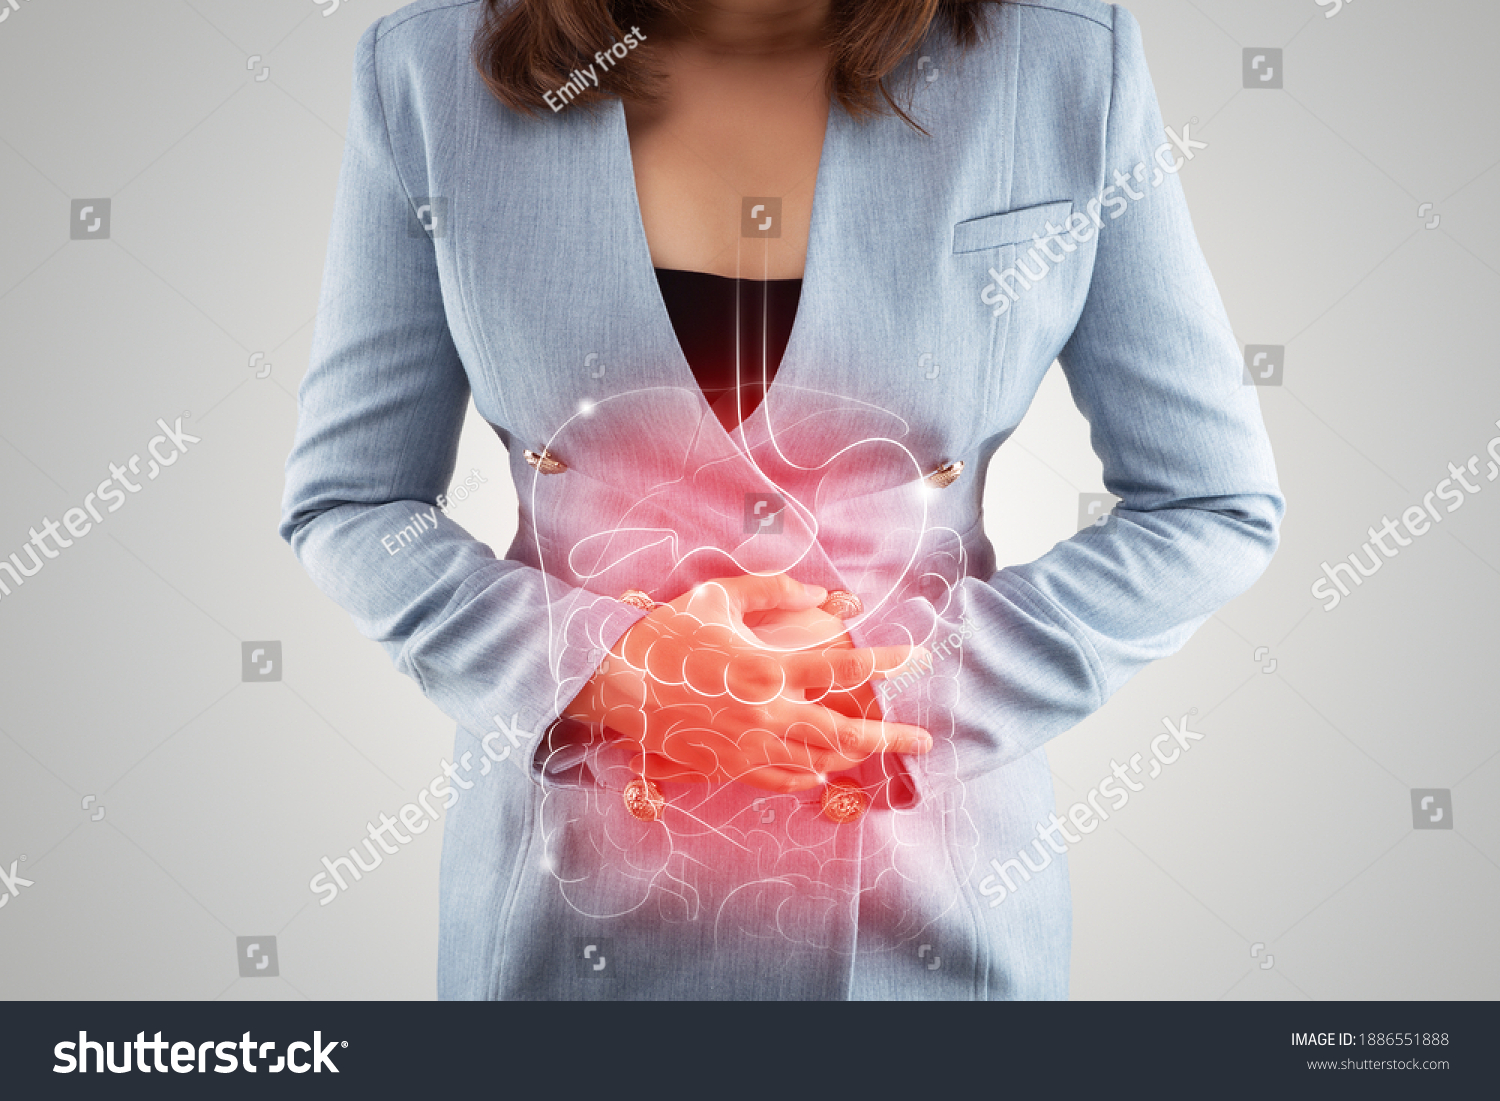 Illustration of internal organs is on the woman's body against the gray background. Business Woman touching stomach painful suffering from enteritis. internal organs of the human body. IBS #1886551888